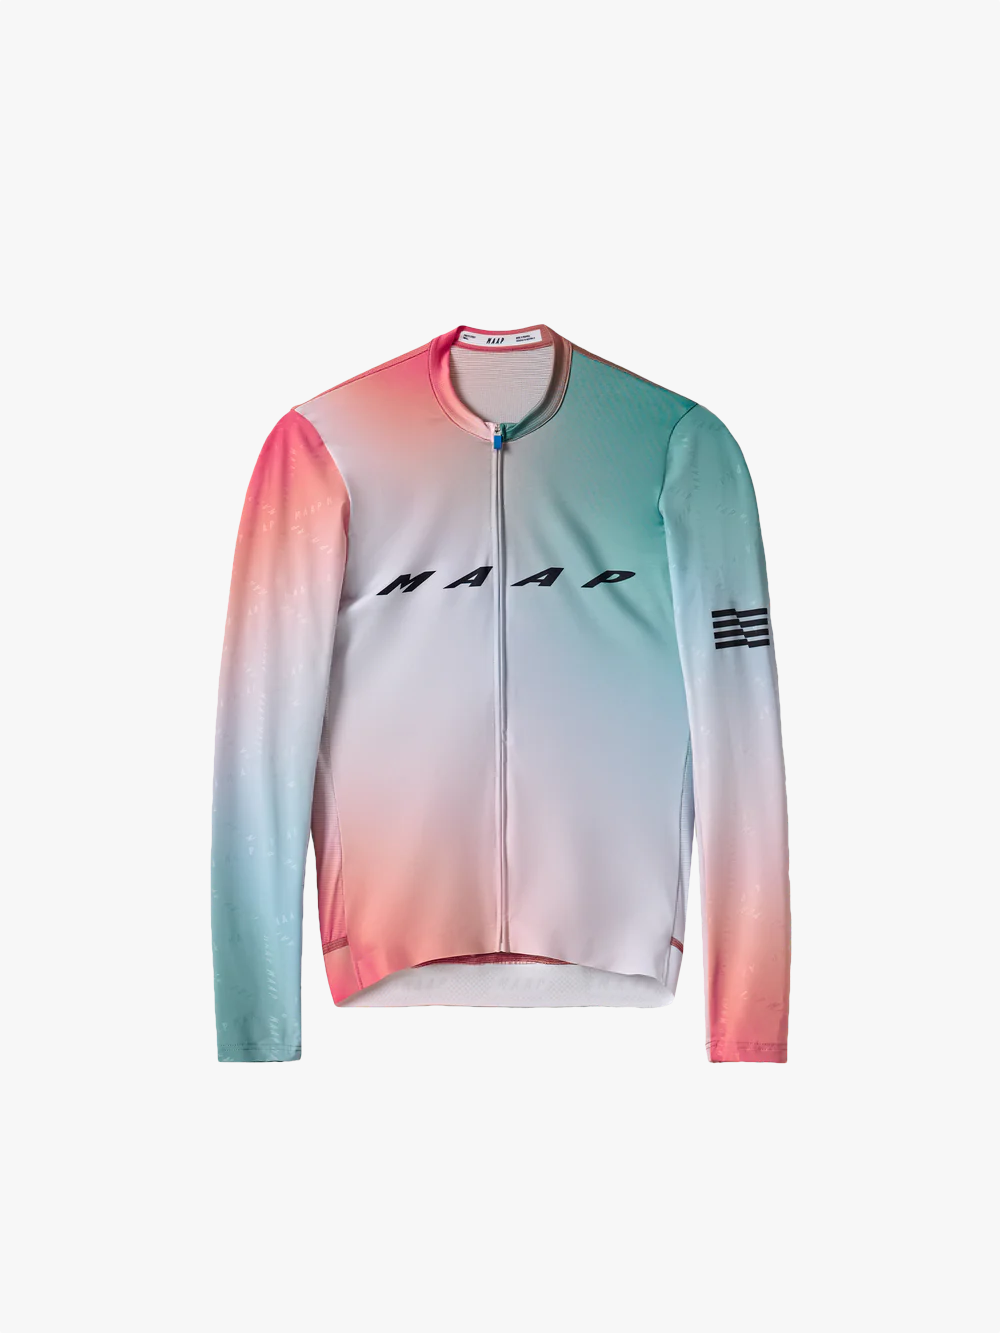 MAAP Blurred Out Pro Hex LS Jersey 2.0 Flame Mix | 高通気性・エアロダイナミクス・リサイクル素材 | CYCLISM